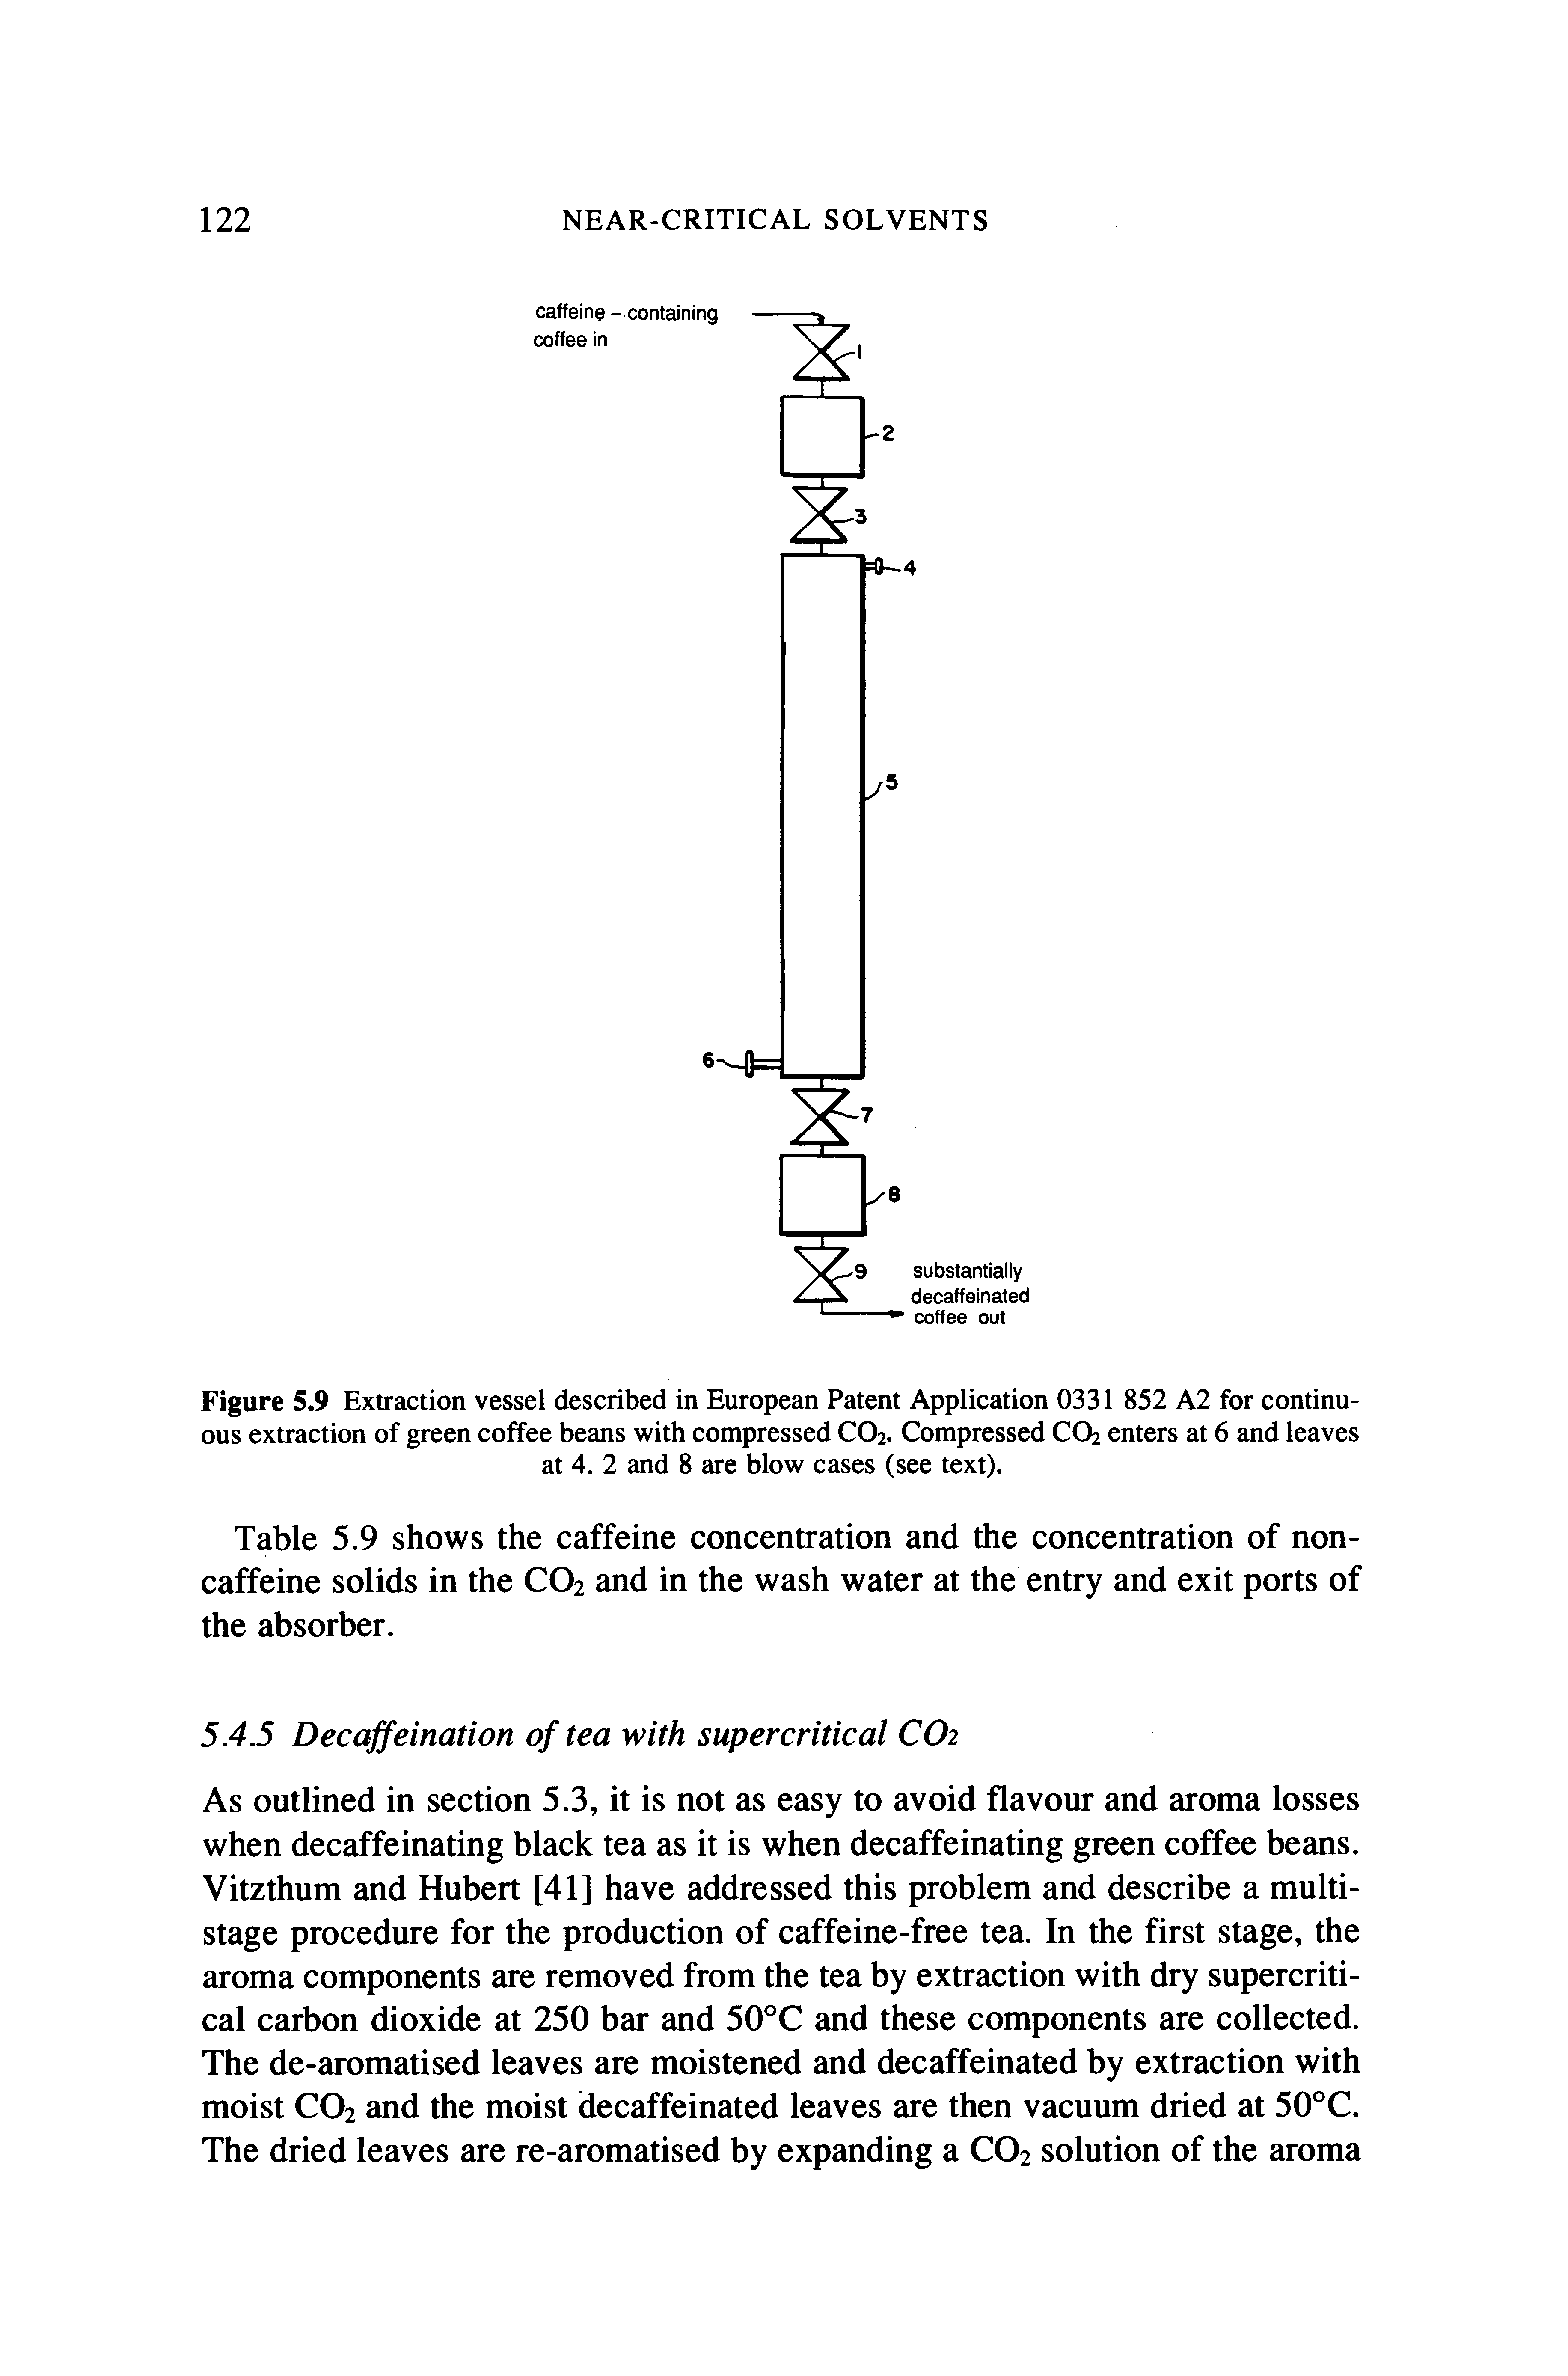 Figure 5.9 Extraction vessel described in European Patent Application 0331 852 A2 for continuous extraction of green coffee beans with compressed CO2. Compressed CO2 enters at 6 and leaves at 4. 2 and 8 are blow cases (see text).